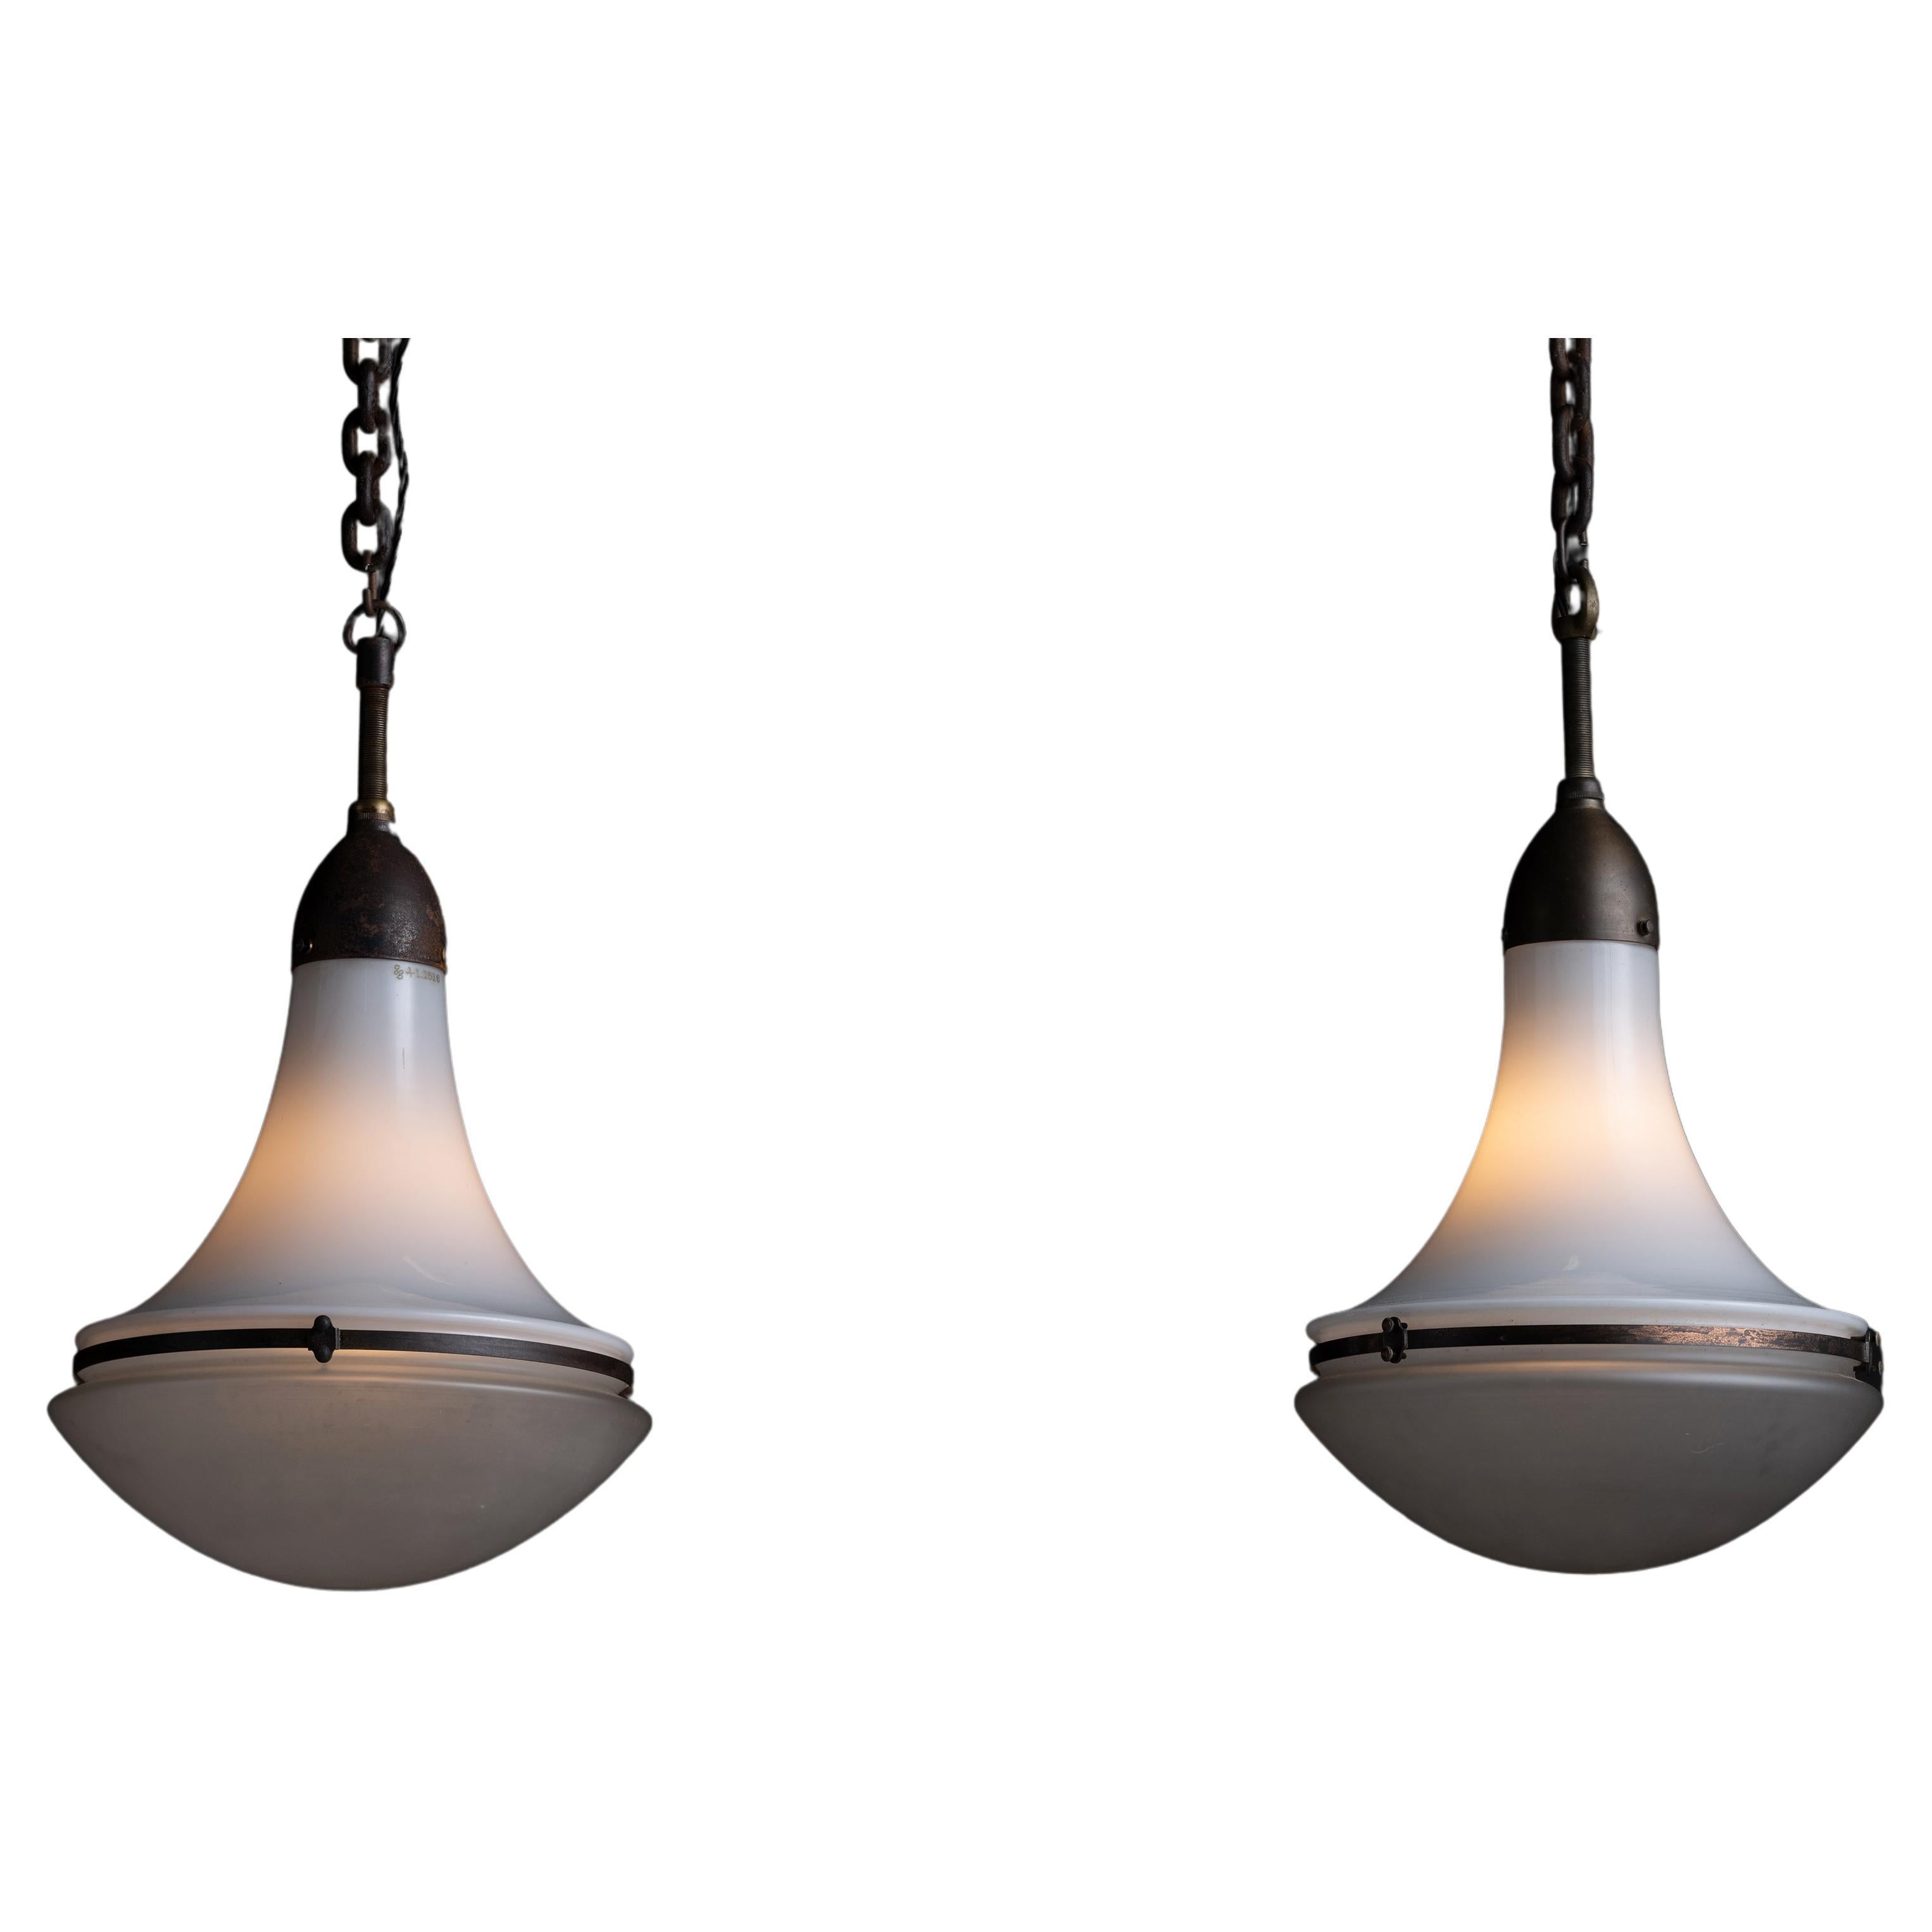 Large Luzette Pendants by Peter Behrens, Germany, circa 1920